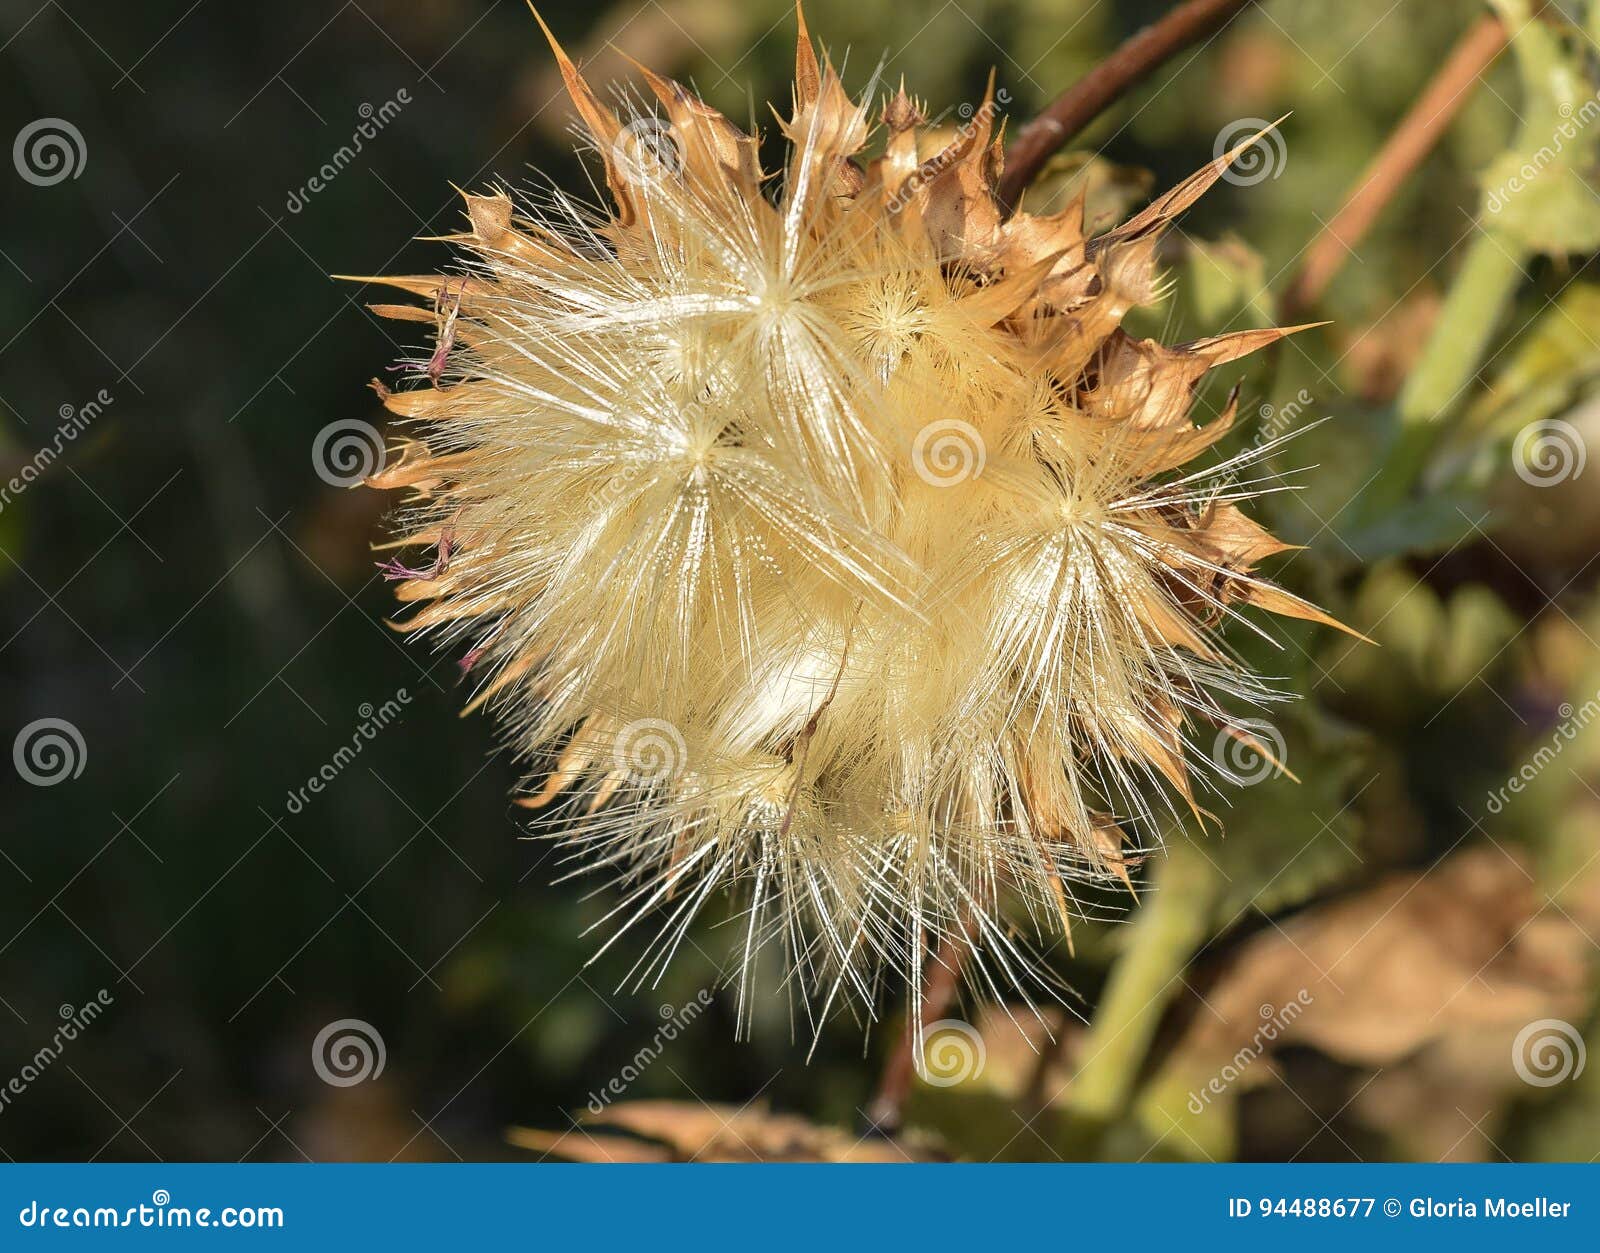 thistle flower in seed at lindo lake park in lakeside, california near san diego